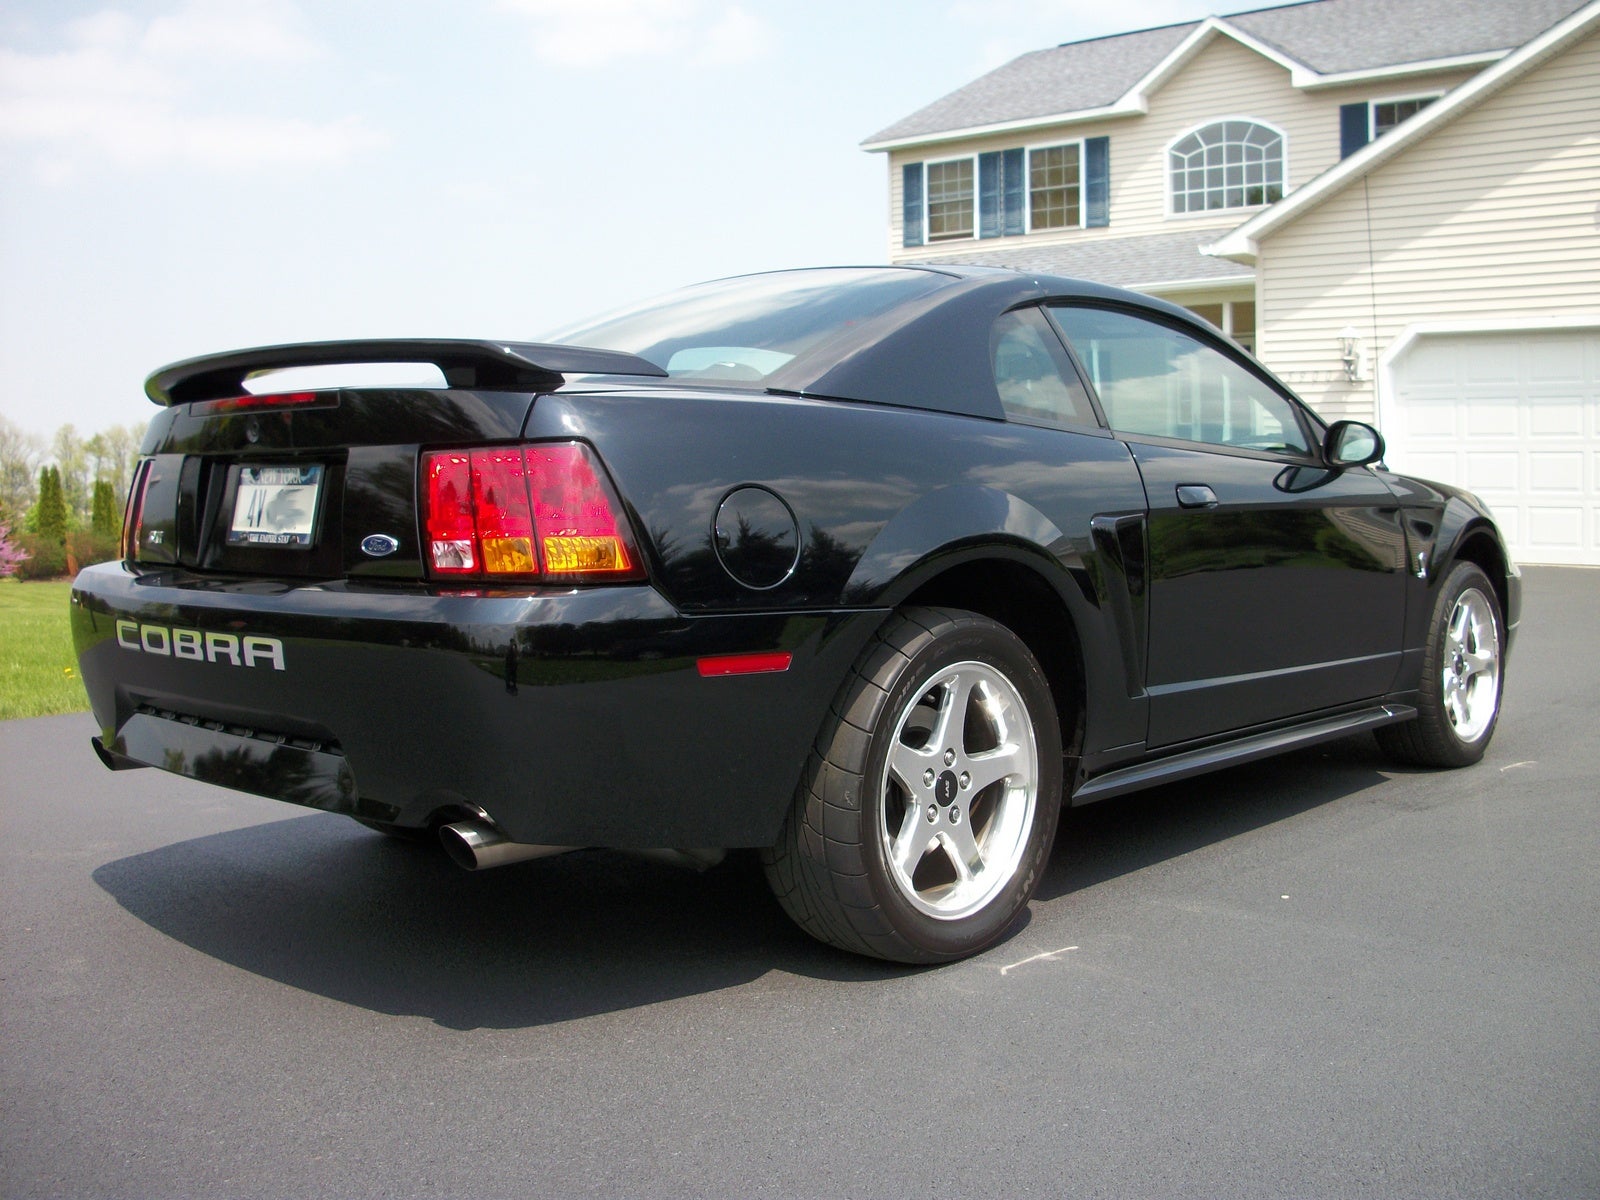 2001 Ford mustang cobra coupe specs #8